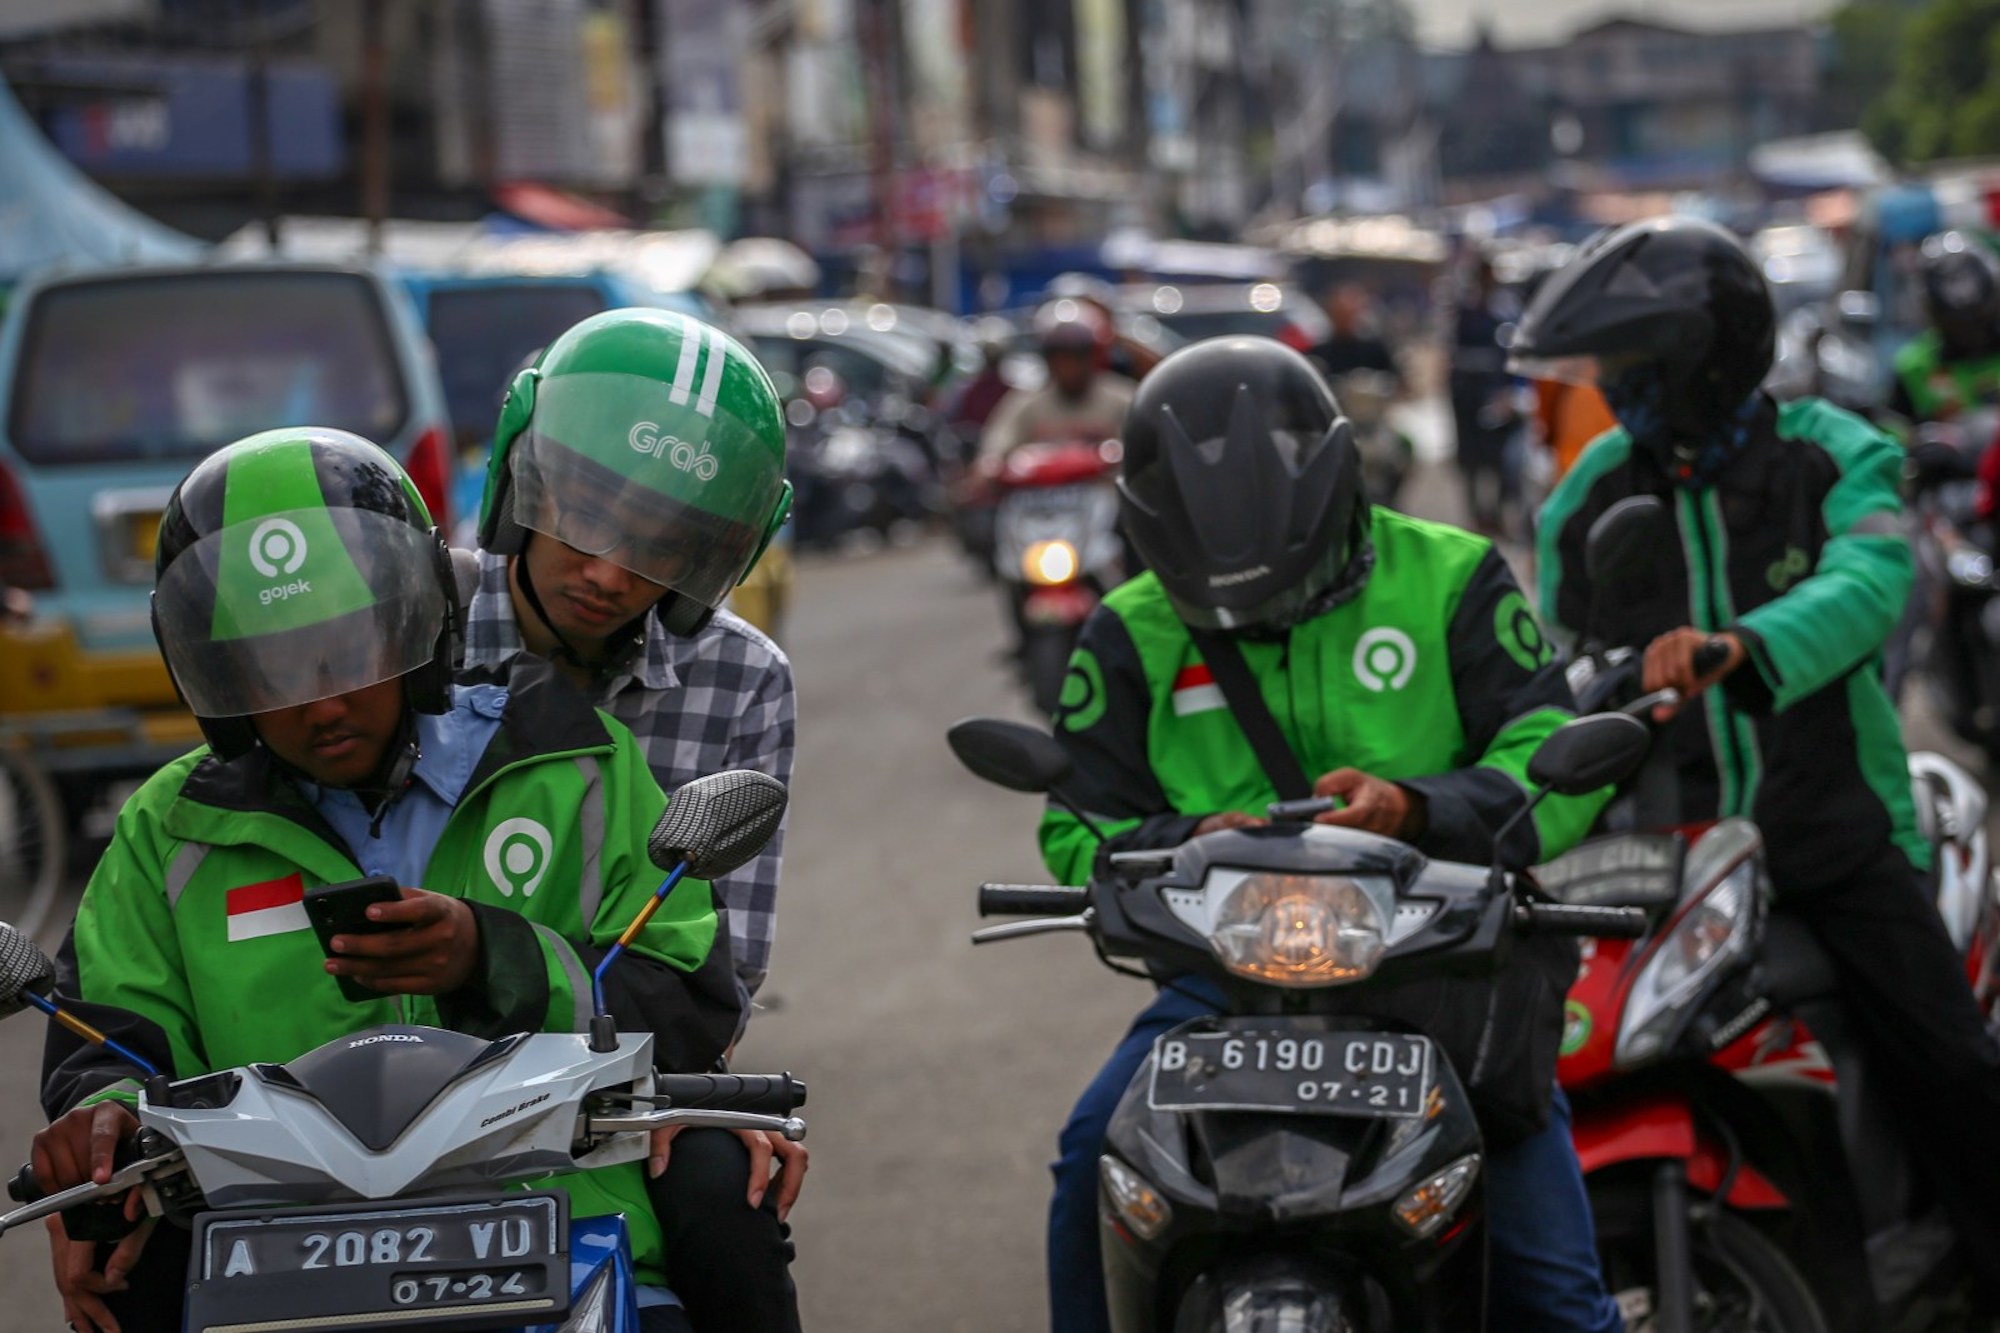 'OJEK Online,' an online motorcycle business currently under scrutiny by Indonesia's Workers Union (SPAI). Media sourced from Kumparan.